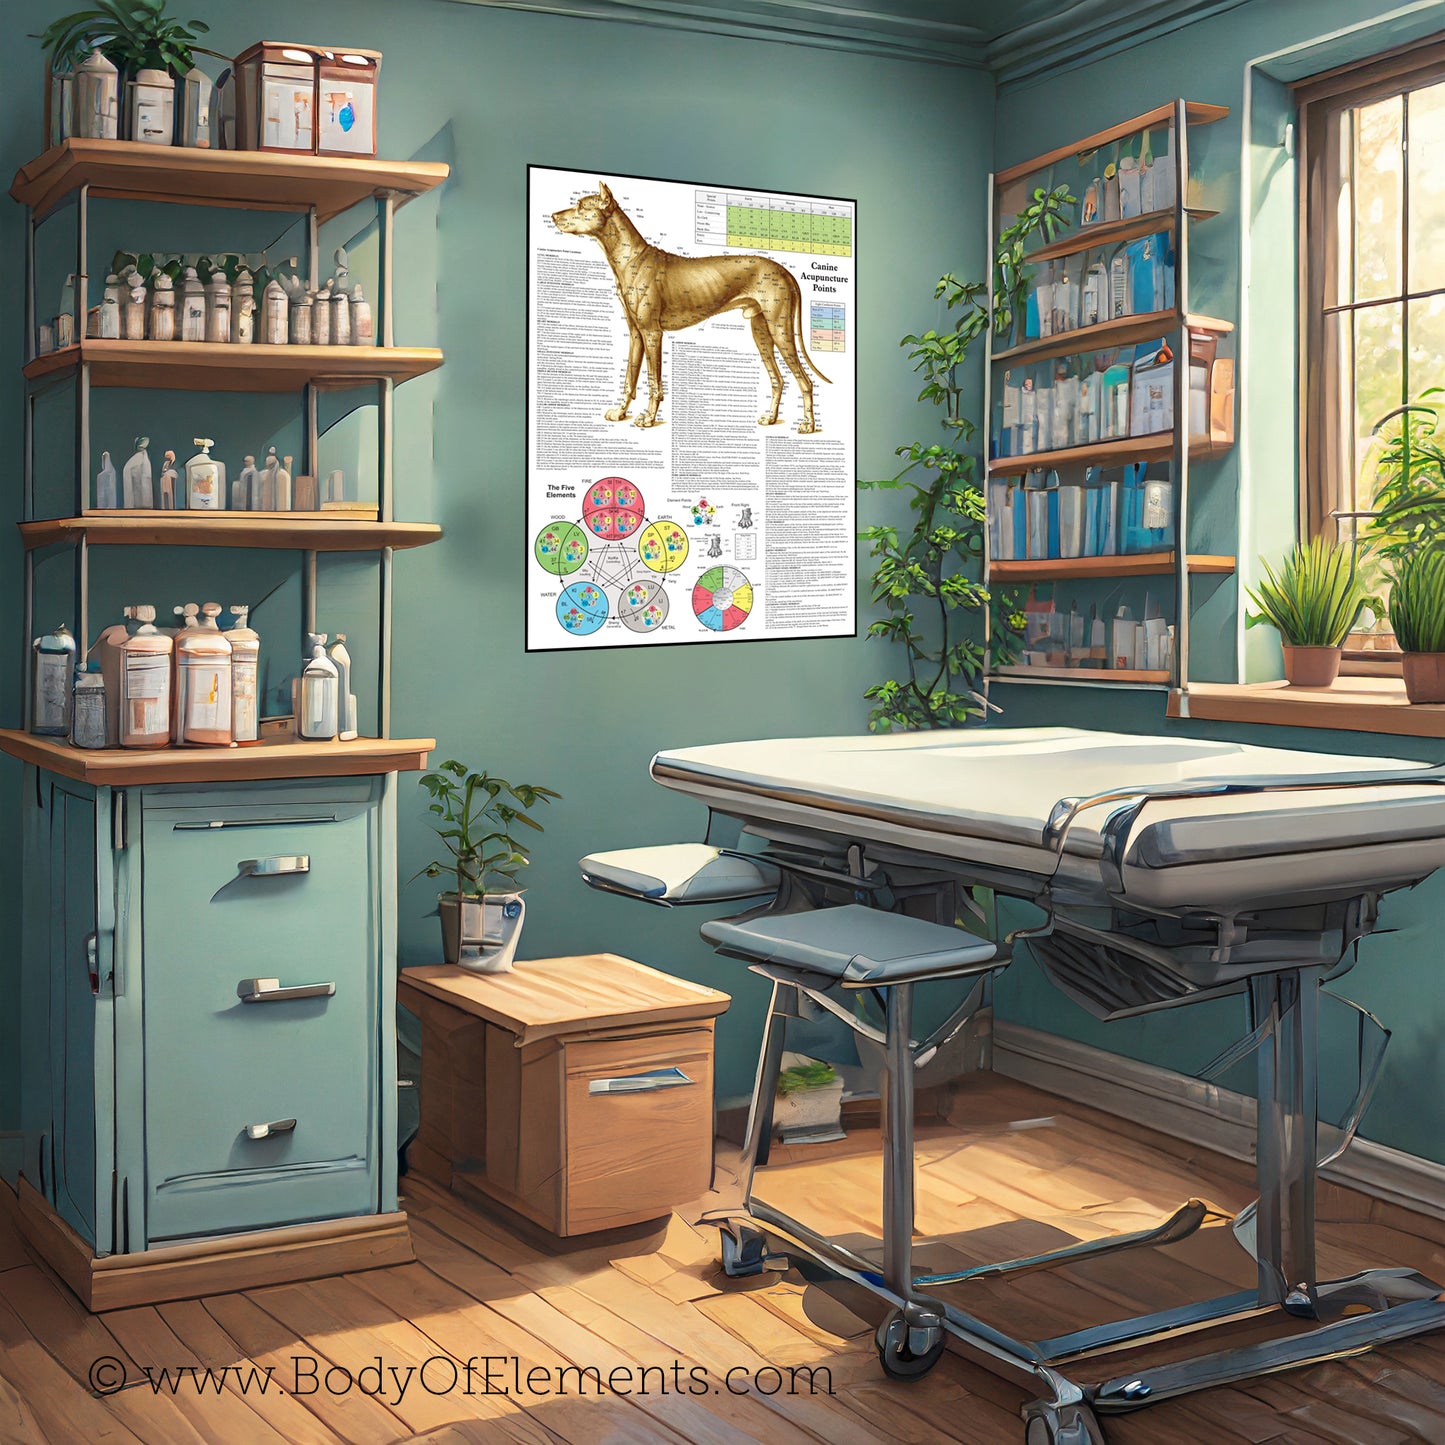 Dog acupuncture points clinic wall chart